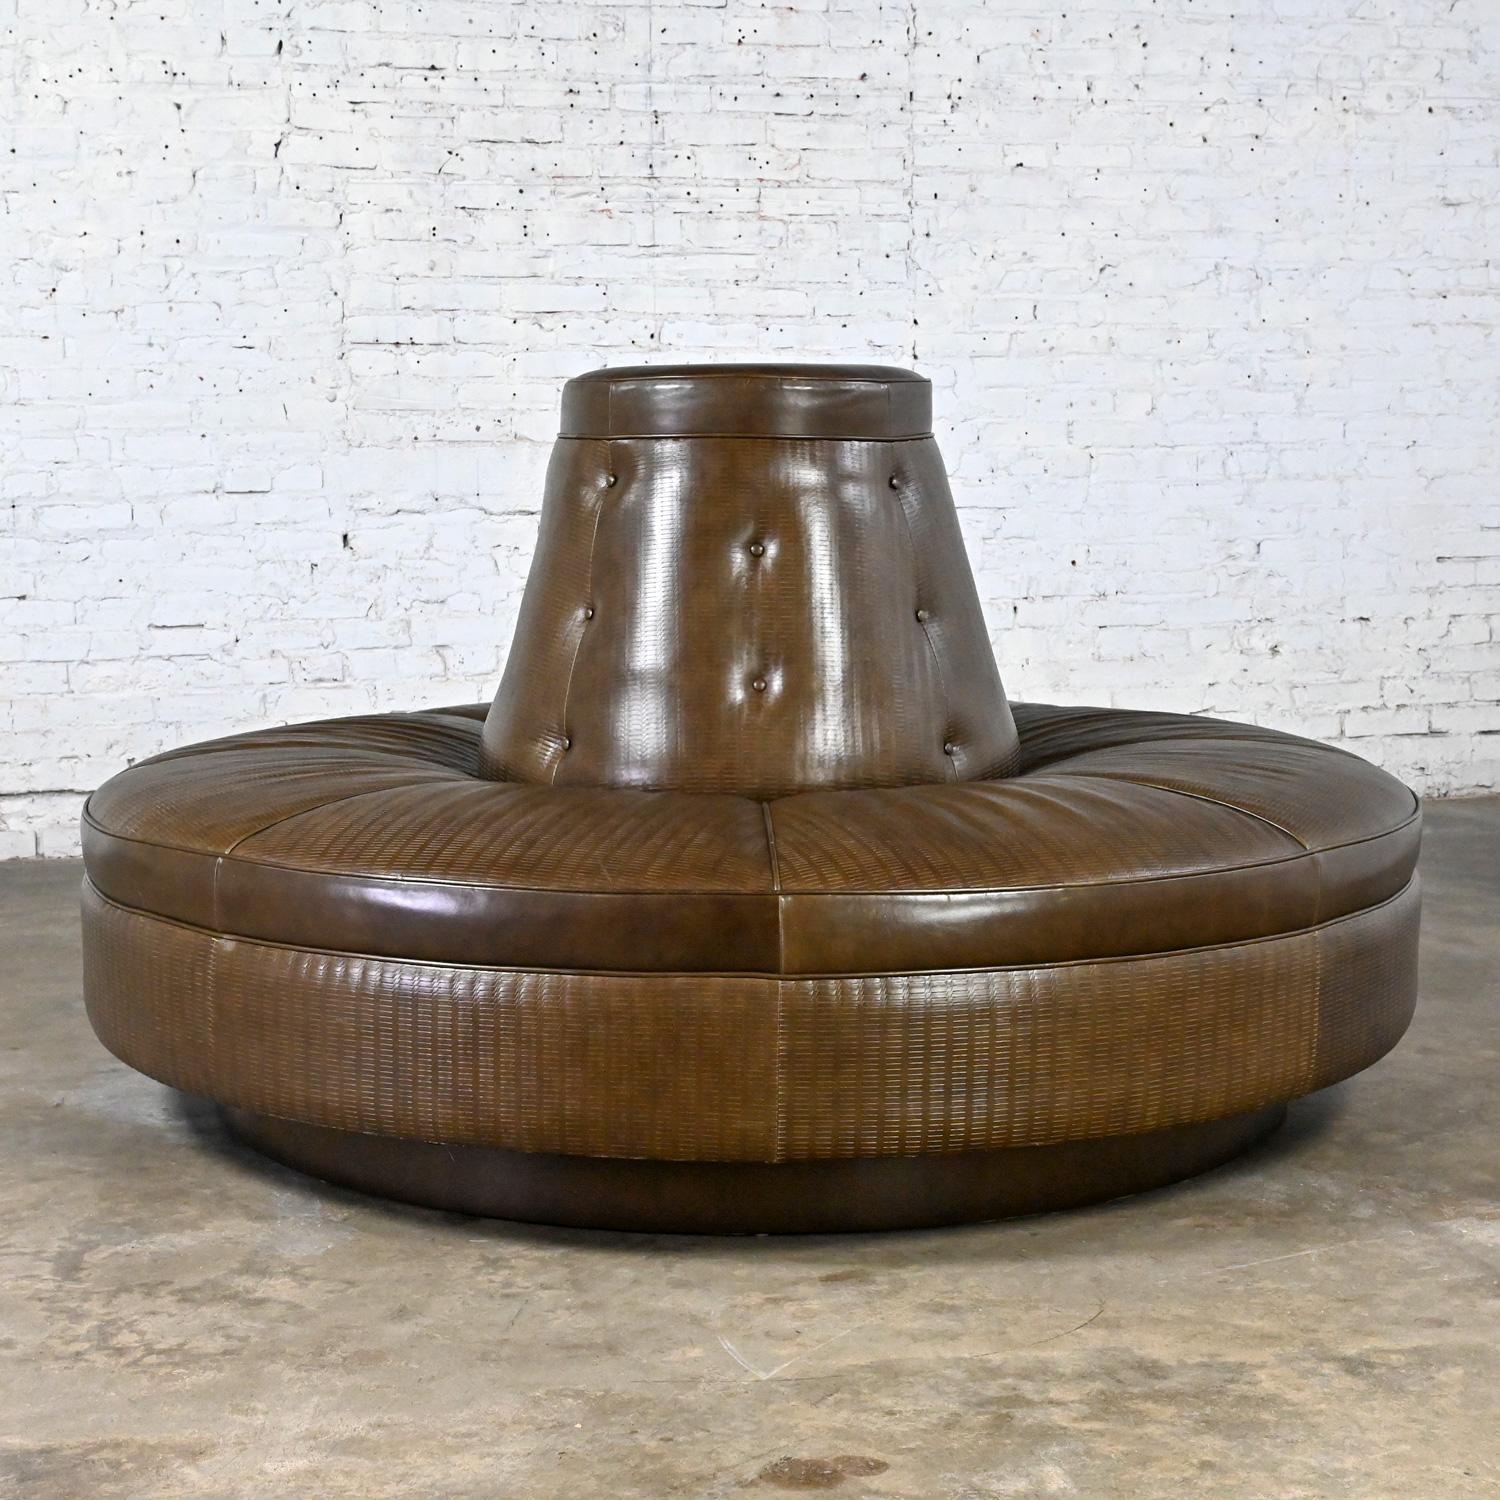 Awesome vintage Modern round or circular banquet sofa or settee custom made with brown smooth & textured leather and button detail. Beautiful condition, keeping in mind that this is vintage and not new so will have signs of use and wear. Some small